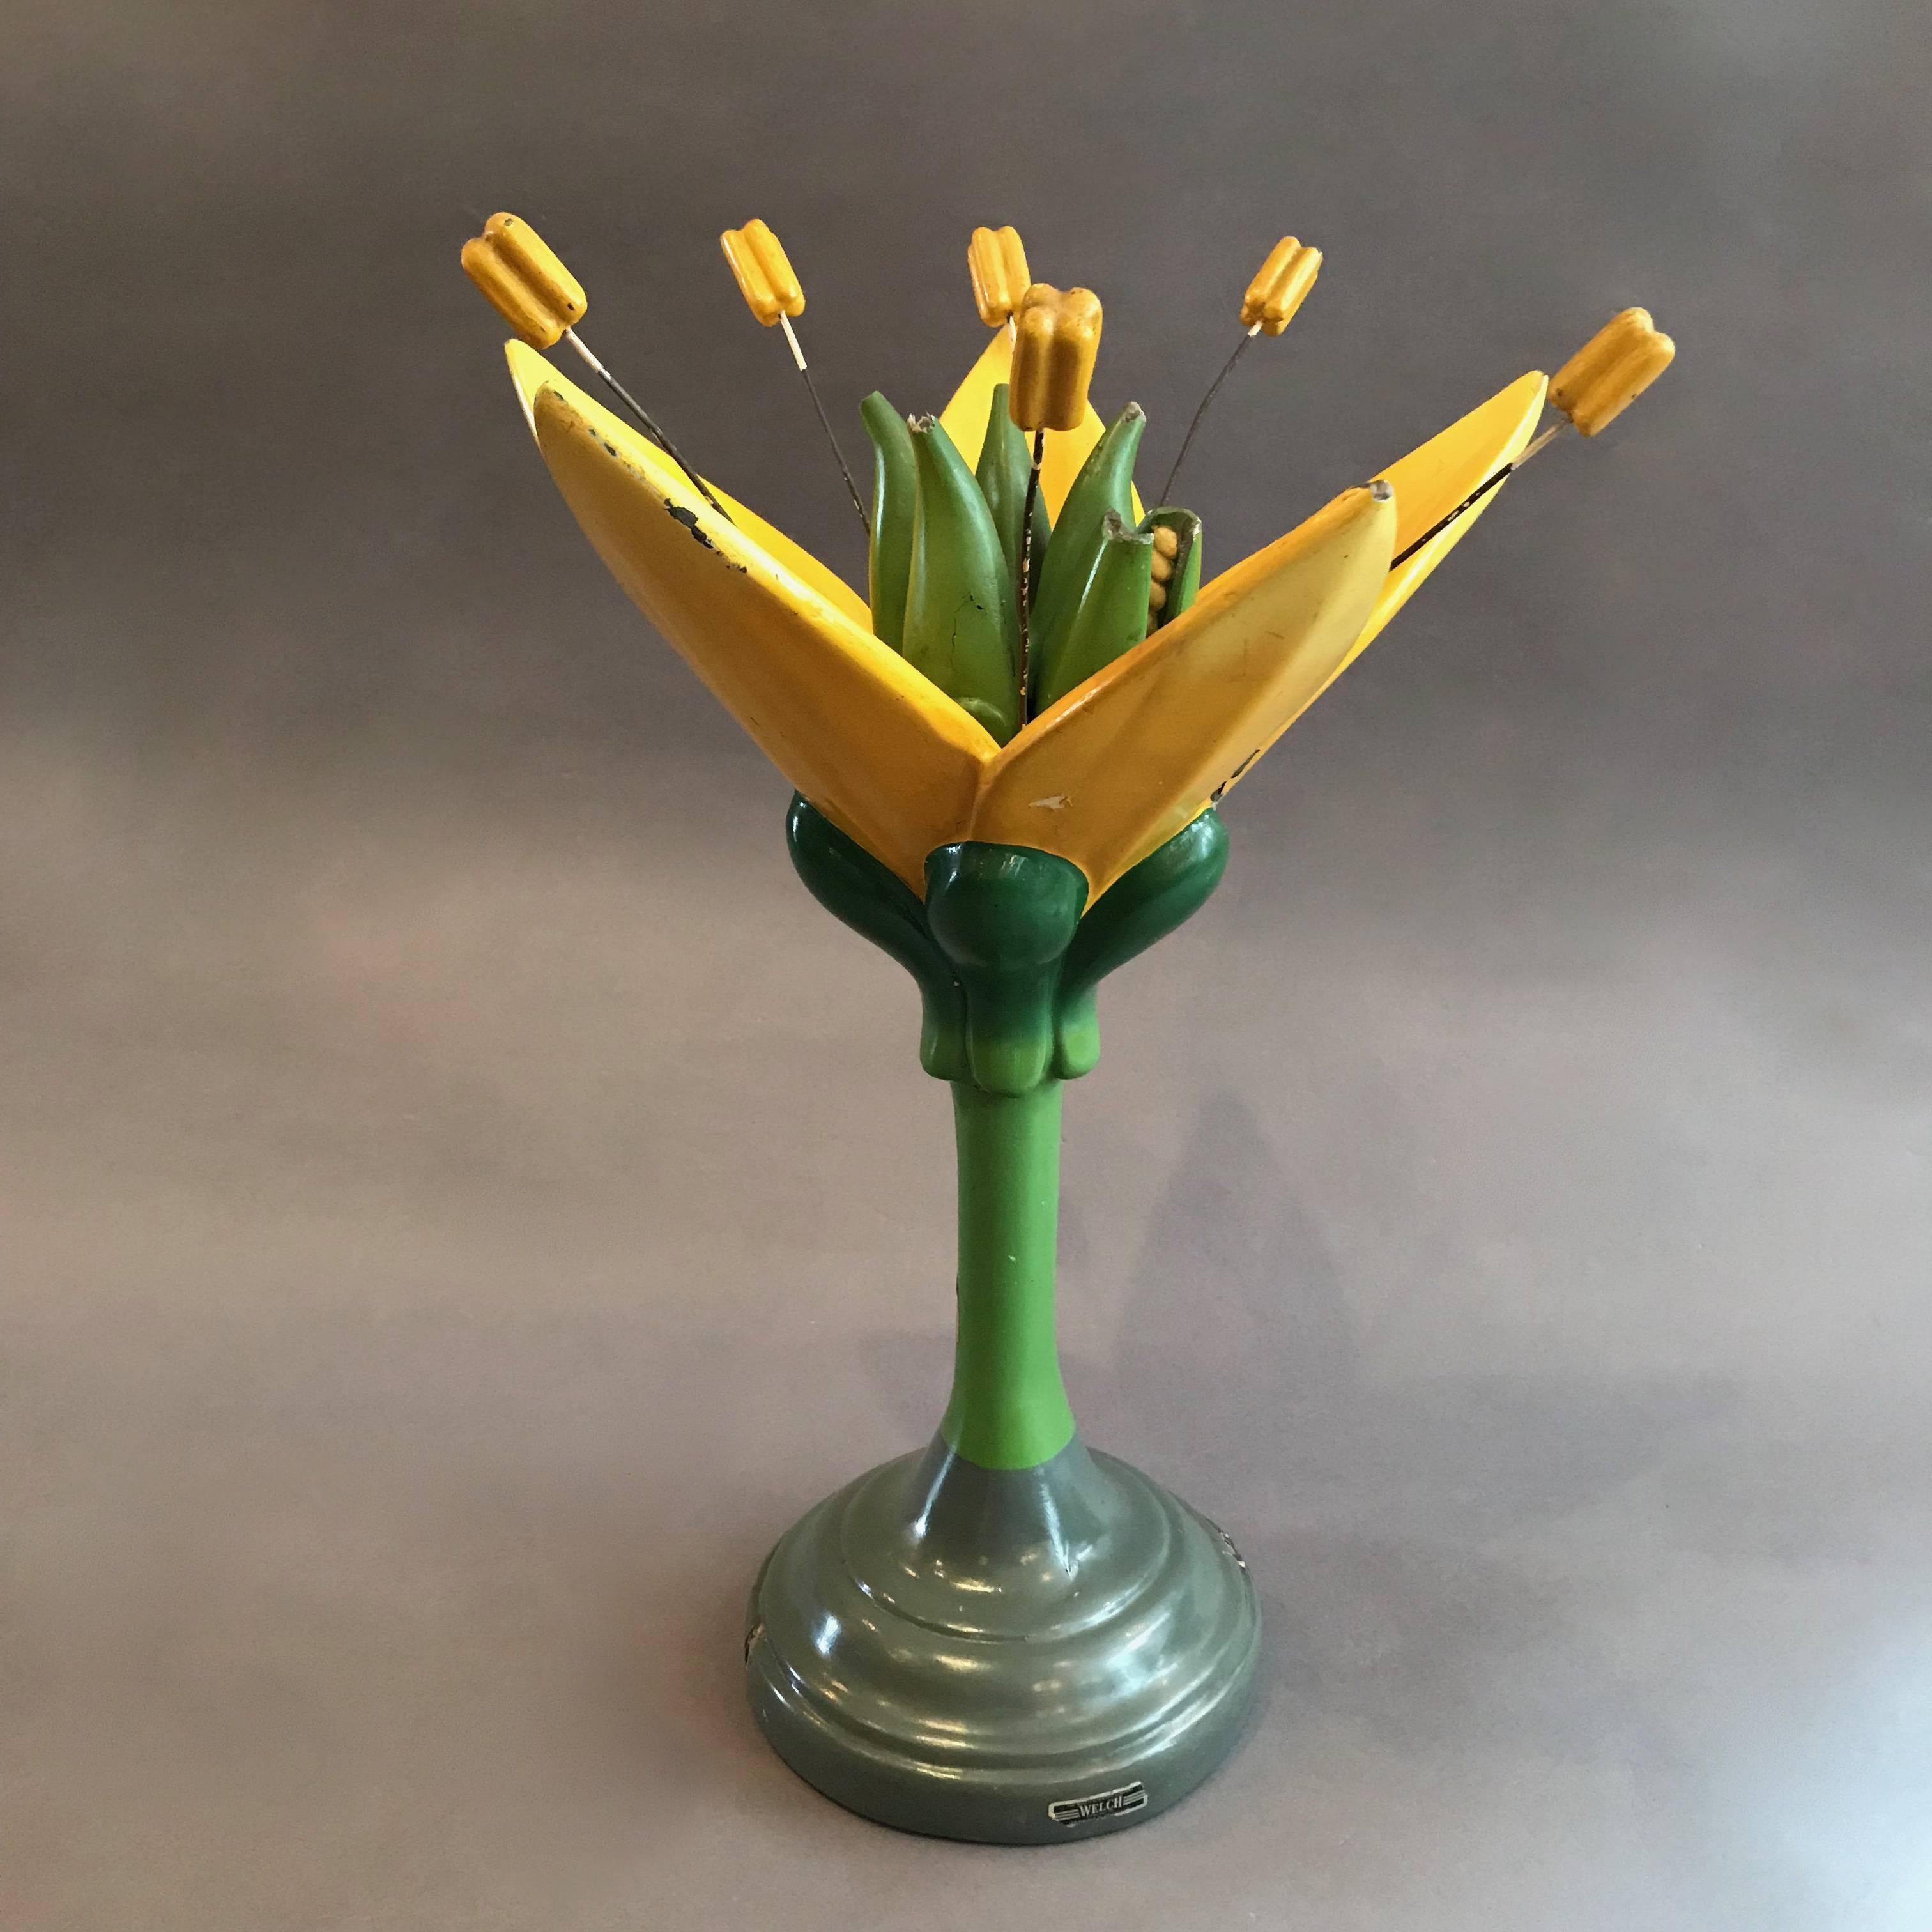 Painted resin composite, scientific, educational, botanical model of a flower with removable parts.